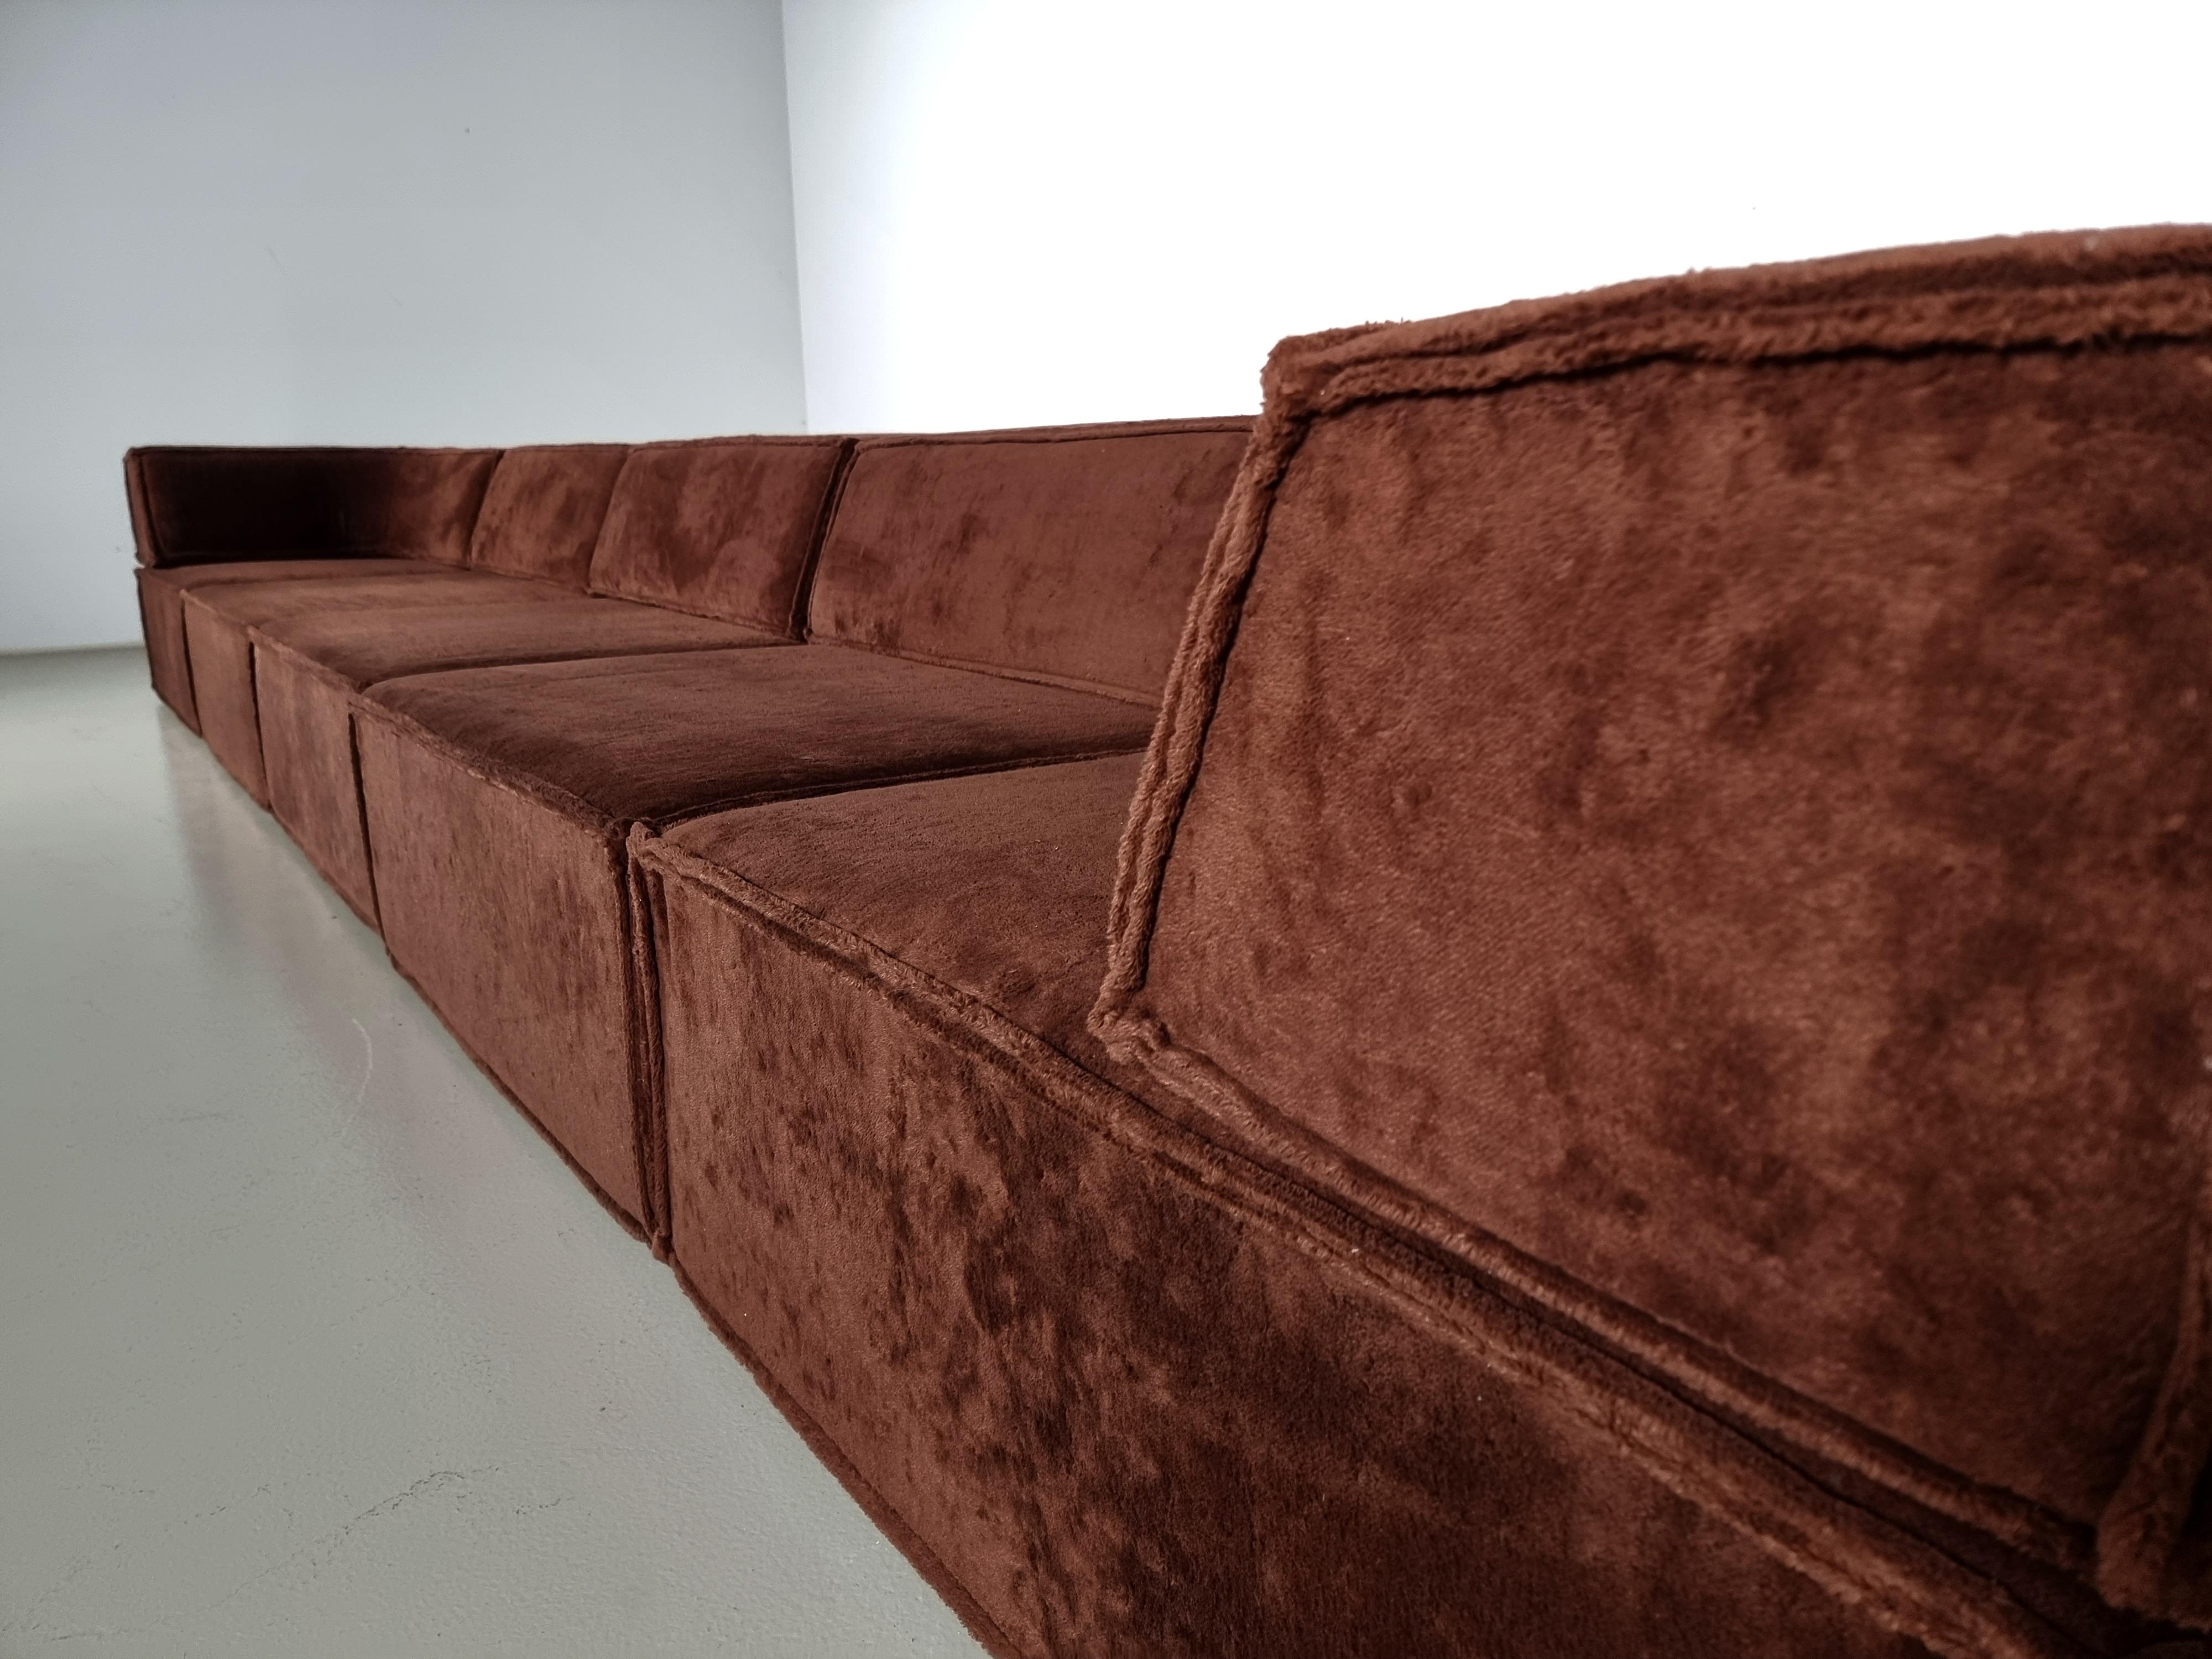 COR Trio Sofa by Team Form Ag in brown original fabric, COR Furniture, Germany 7